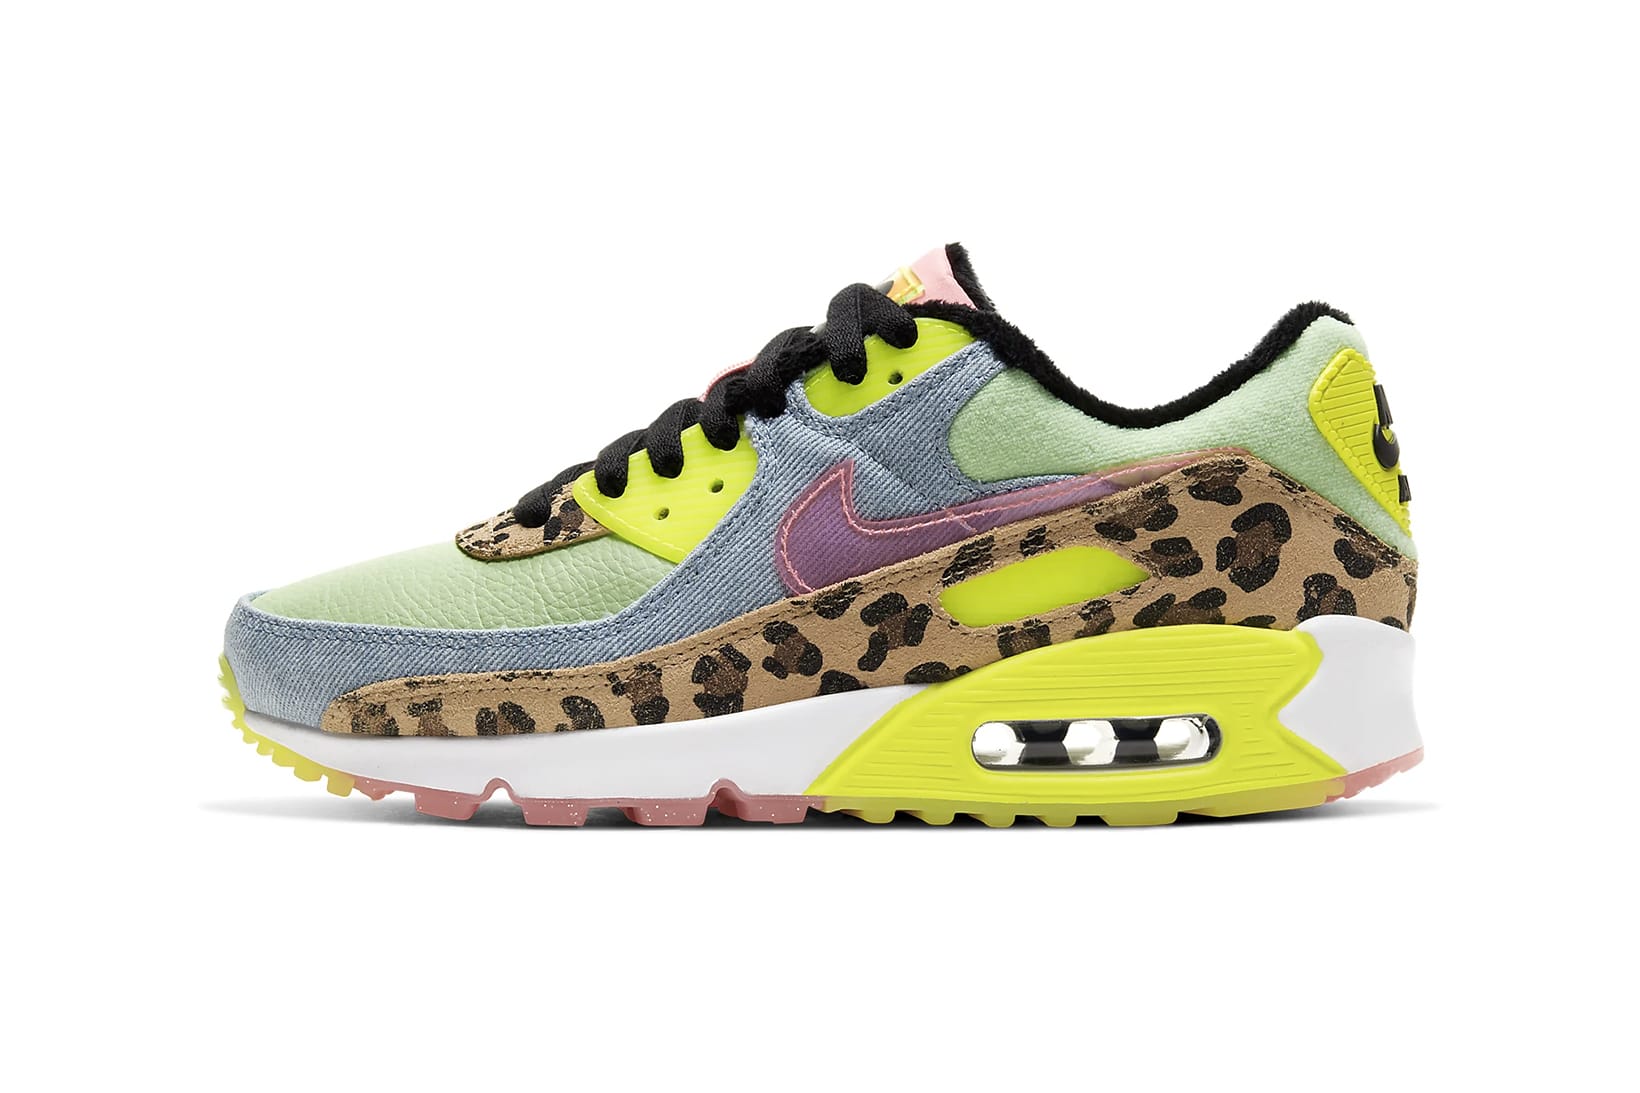 nike air max neon green and pink